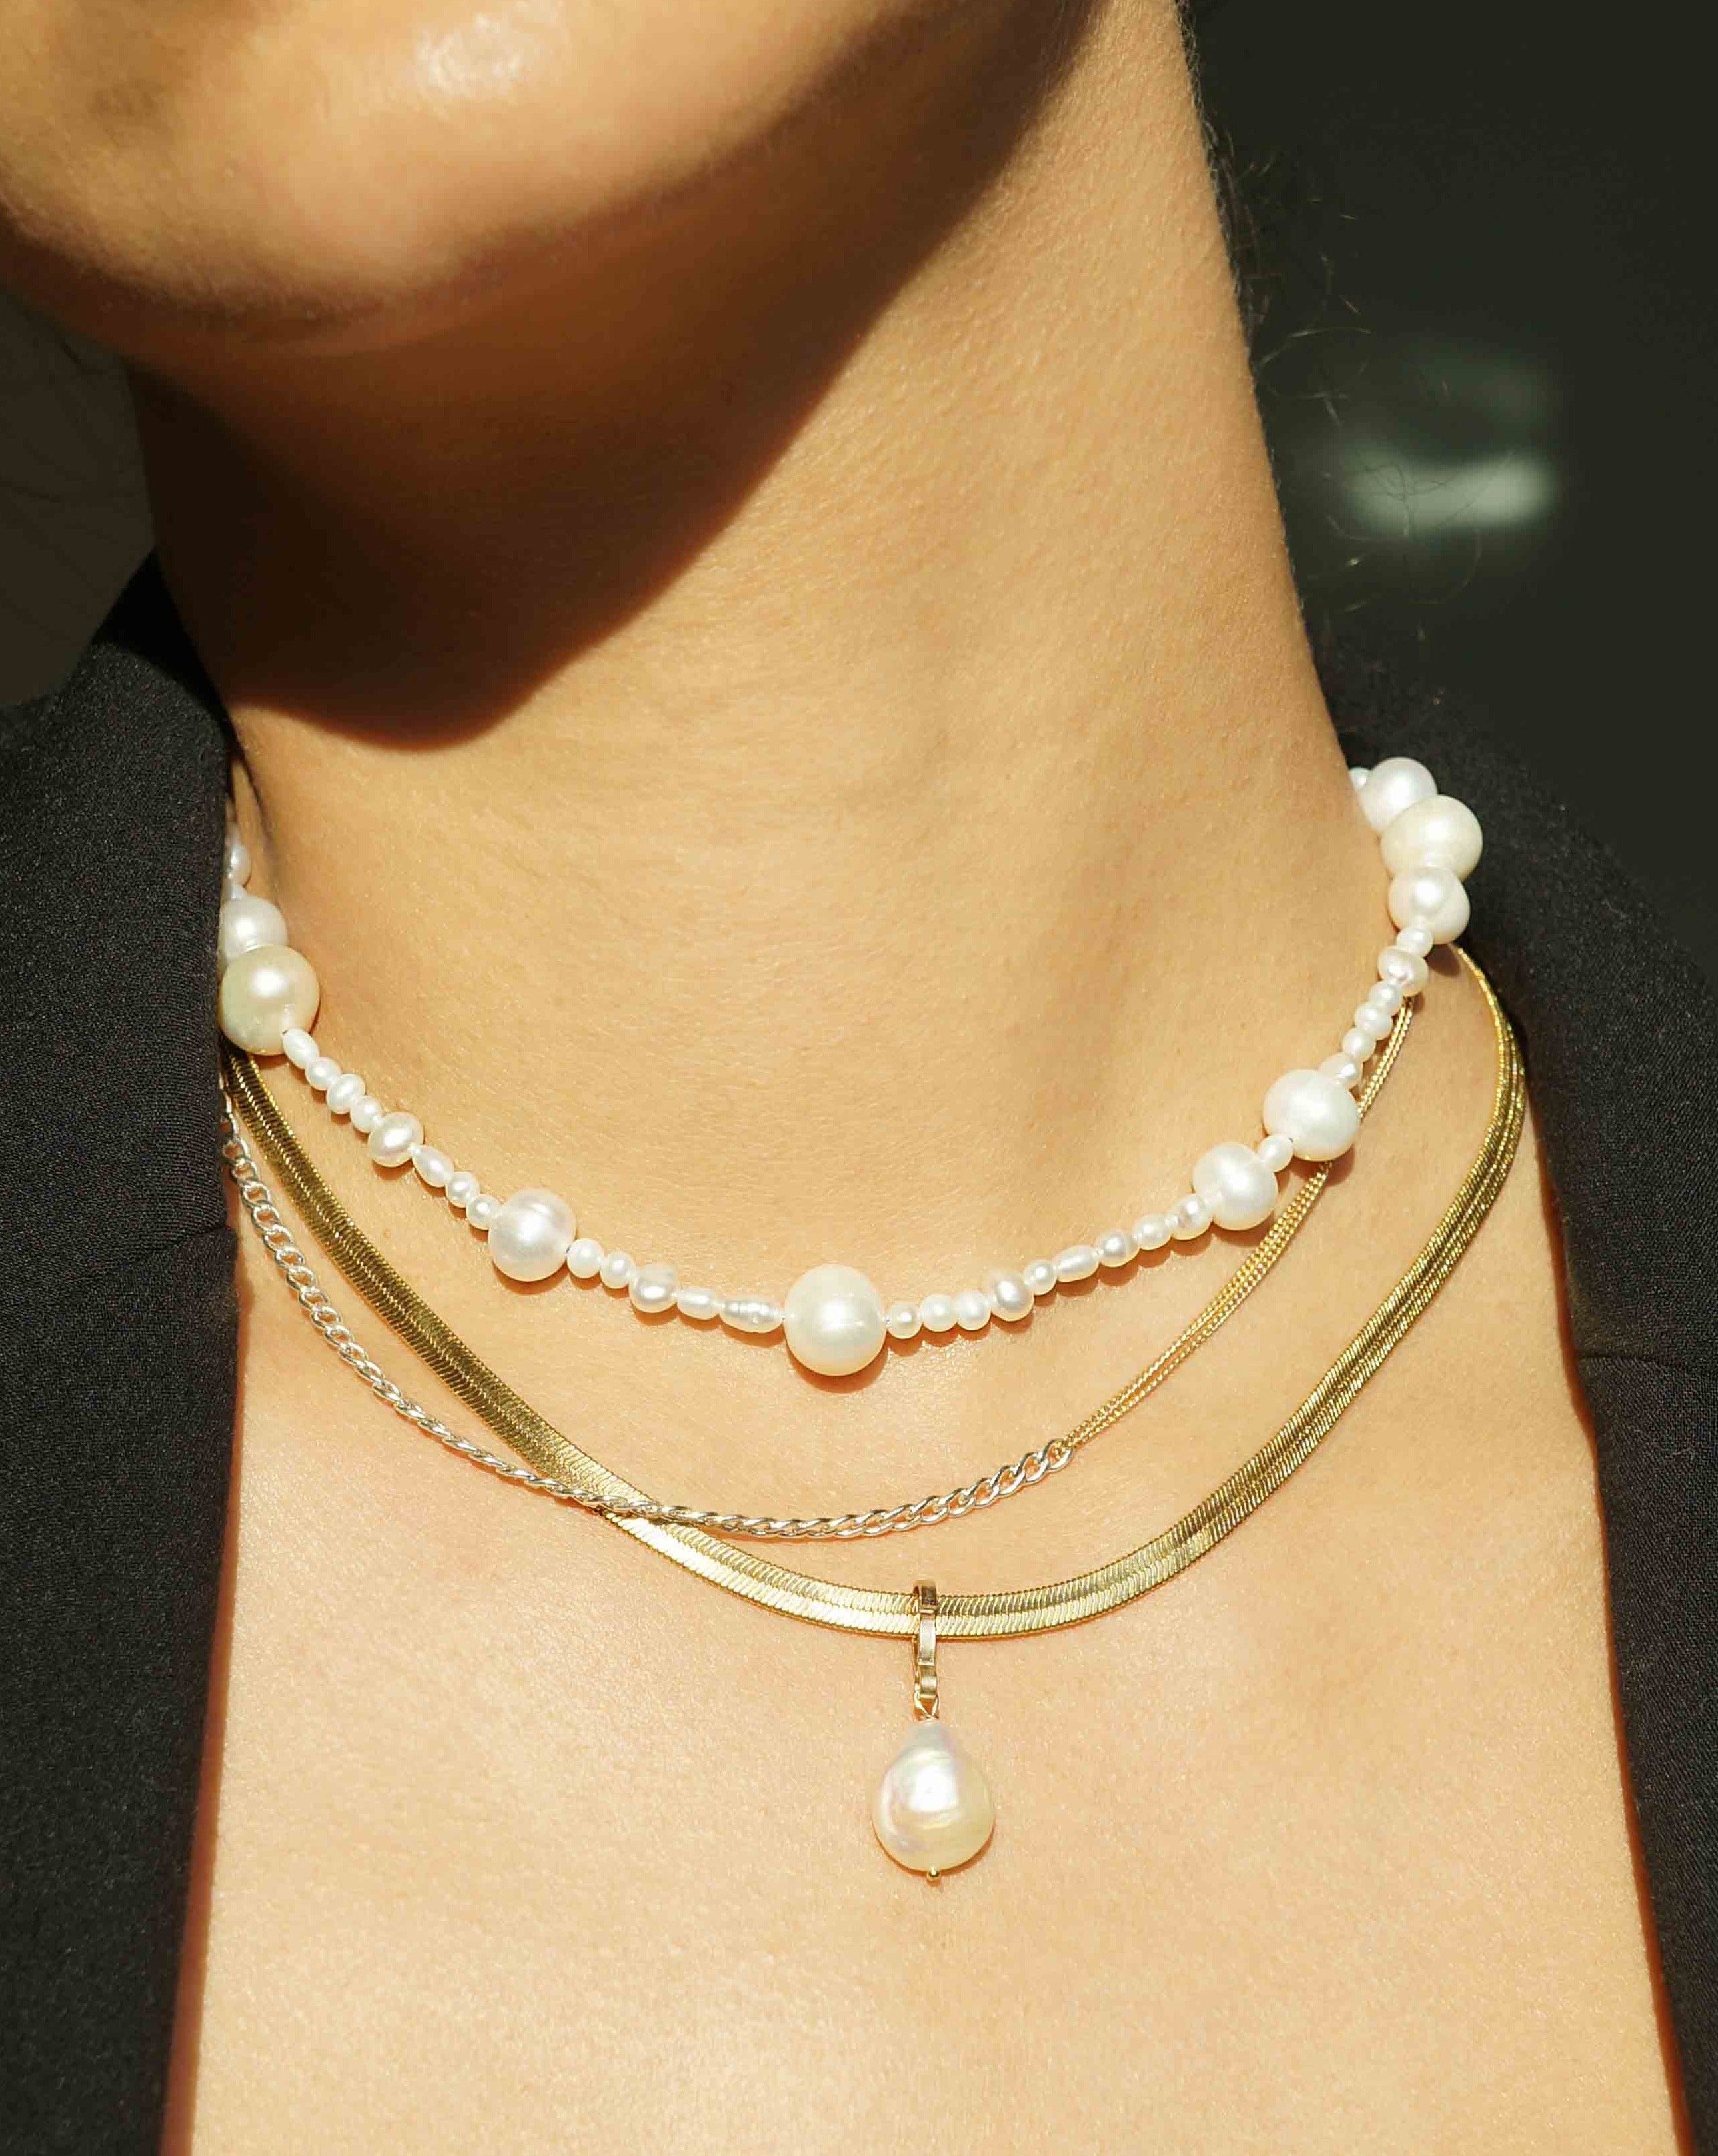 Sam Necklace by KOZAKH. A 16 inches long Herringbone chain necklace, crafted in 18K Gold bonded chain with anti-tarnish treatment, featuring a white tail coin Pearl.